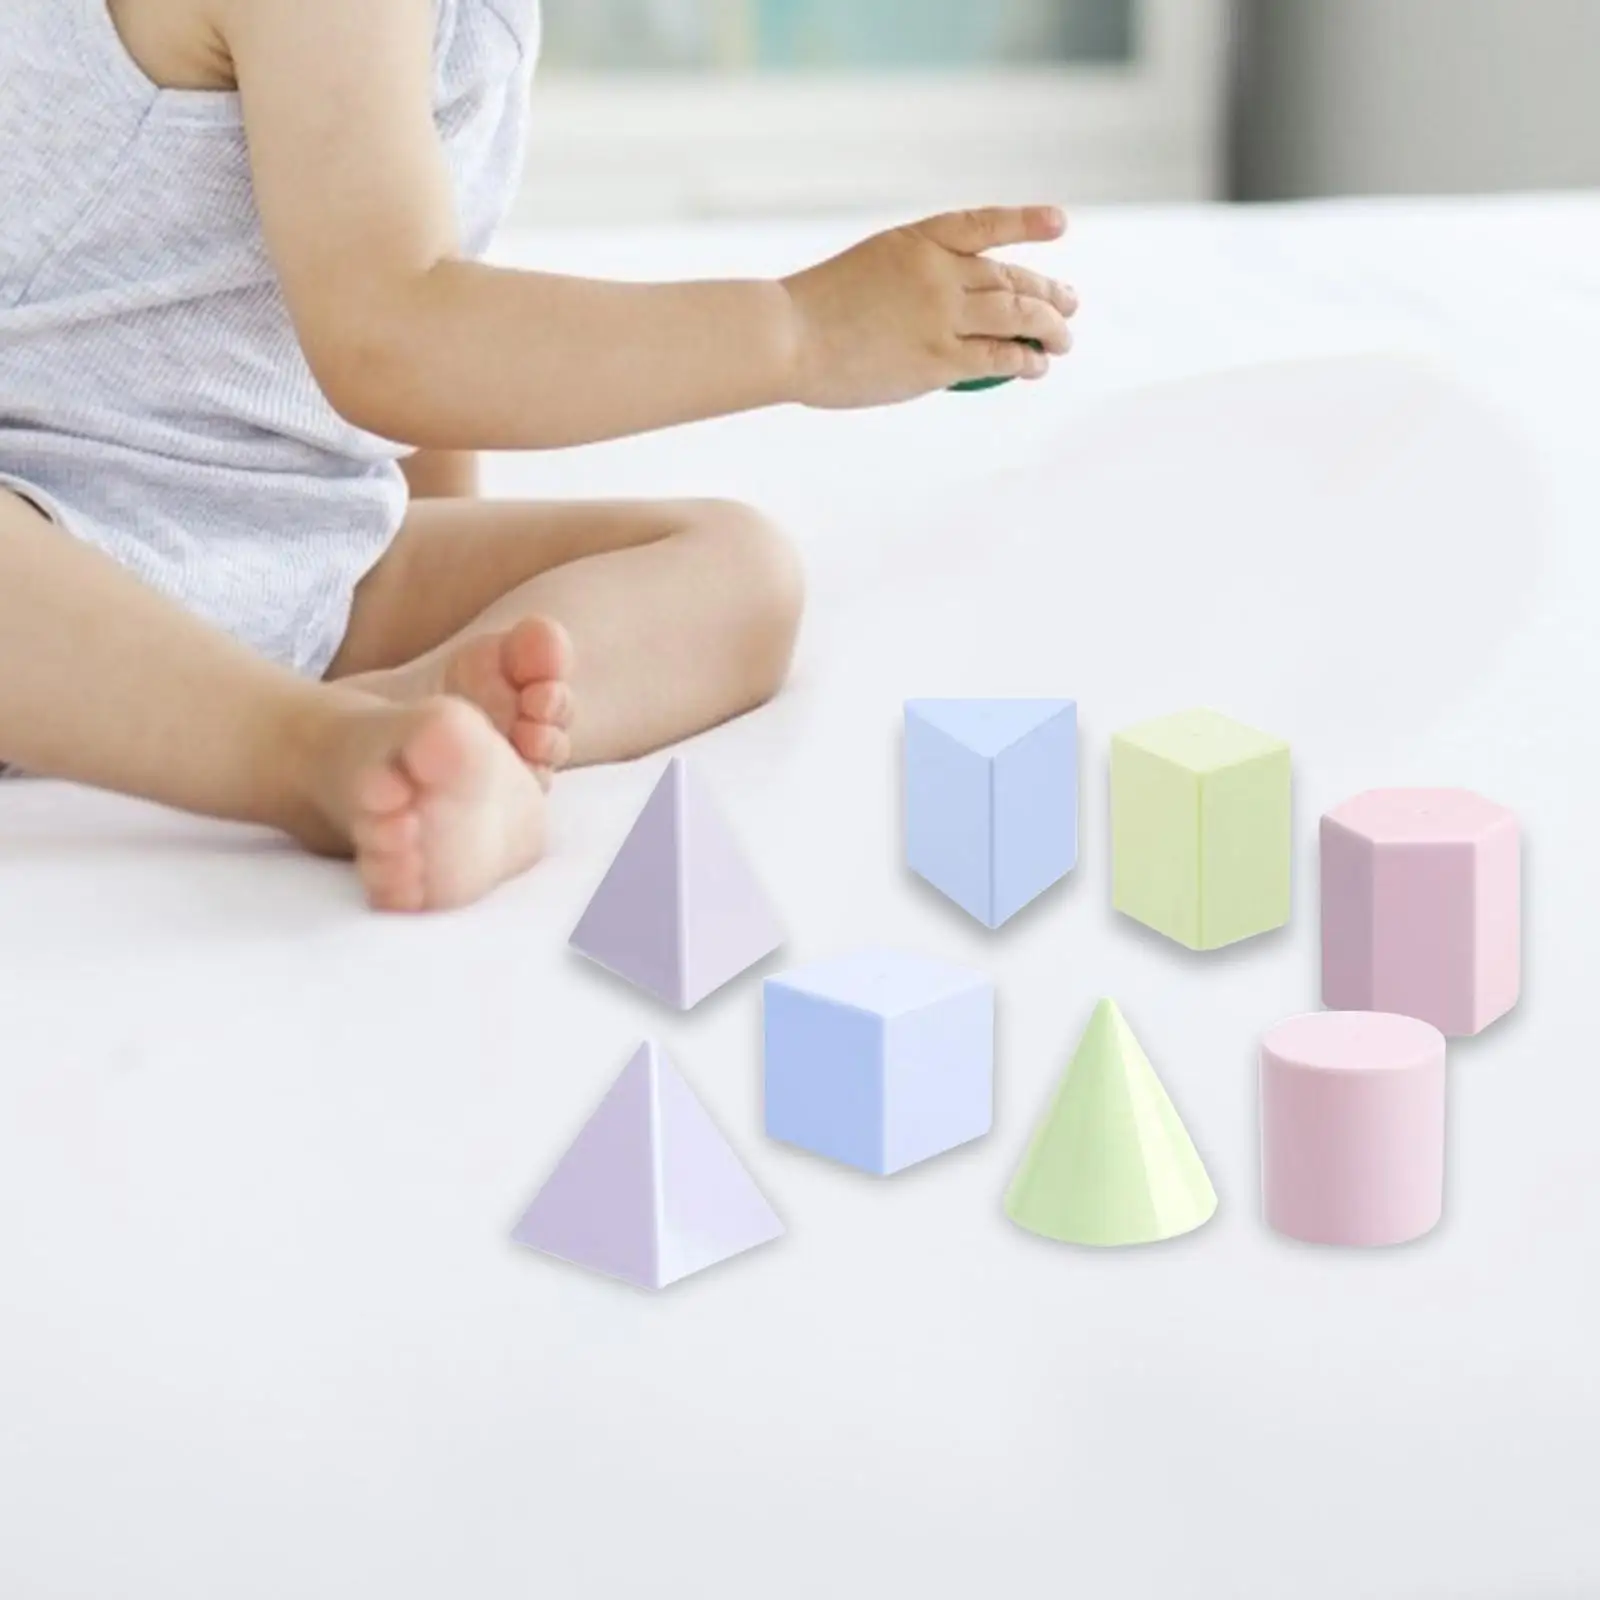 8 Pieces 3D Shape Geometric Math Toy Colorful Educational Toy for Homeschool